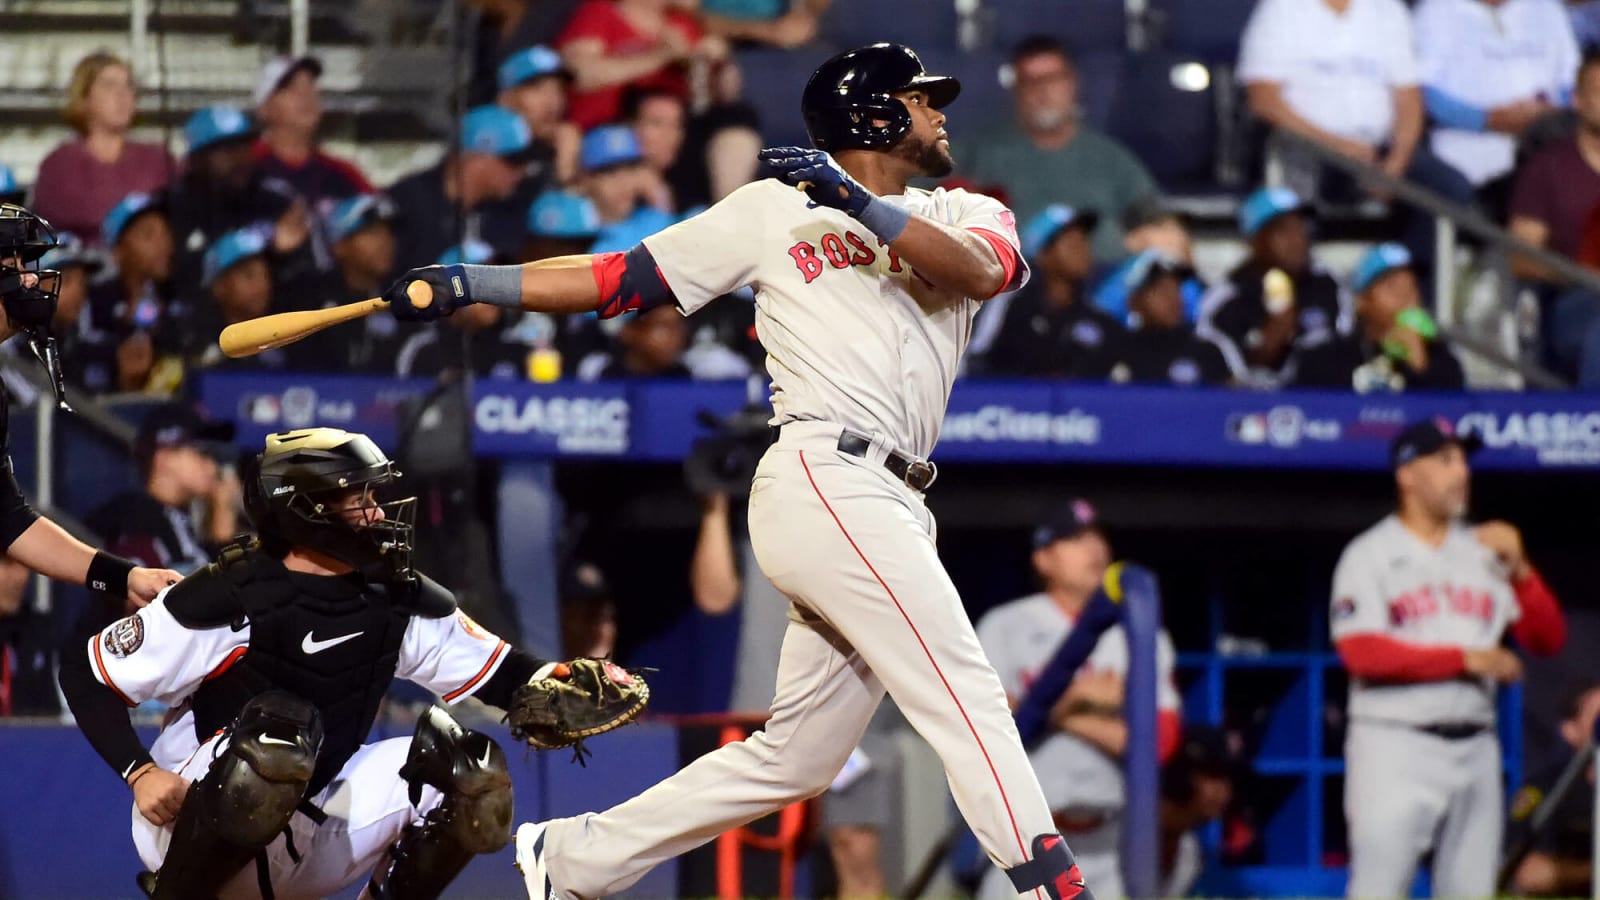 Franchy Cordero’s late-game heroics go for naught as Red Sox fall to Orioles, 5-3, in Little League Classic